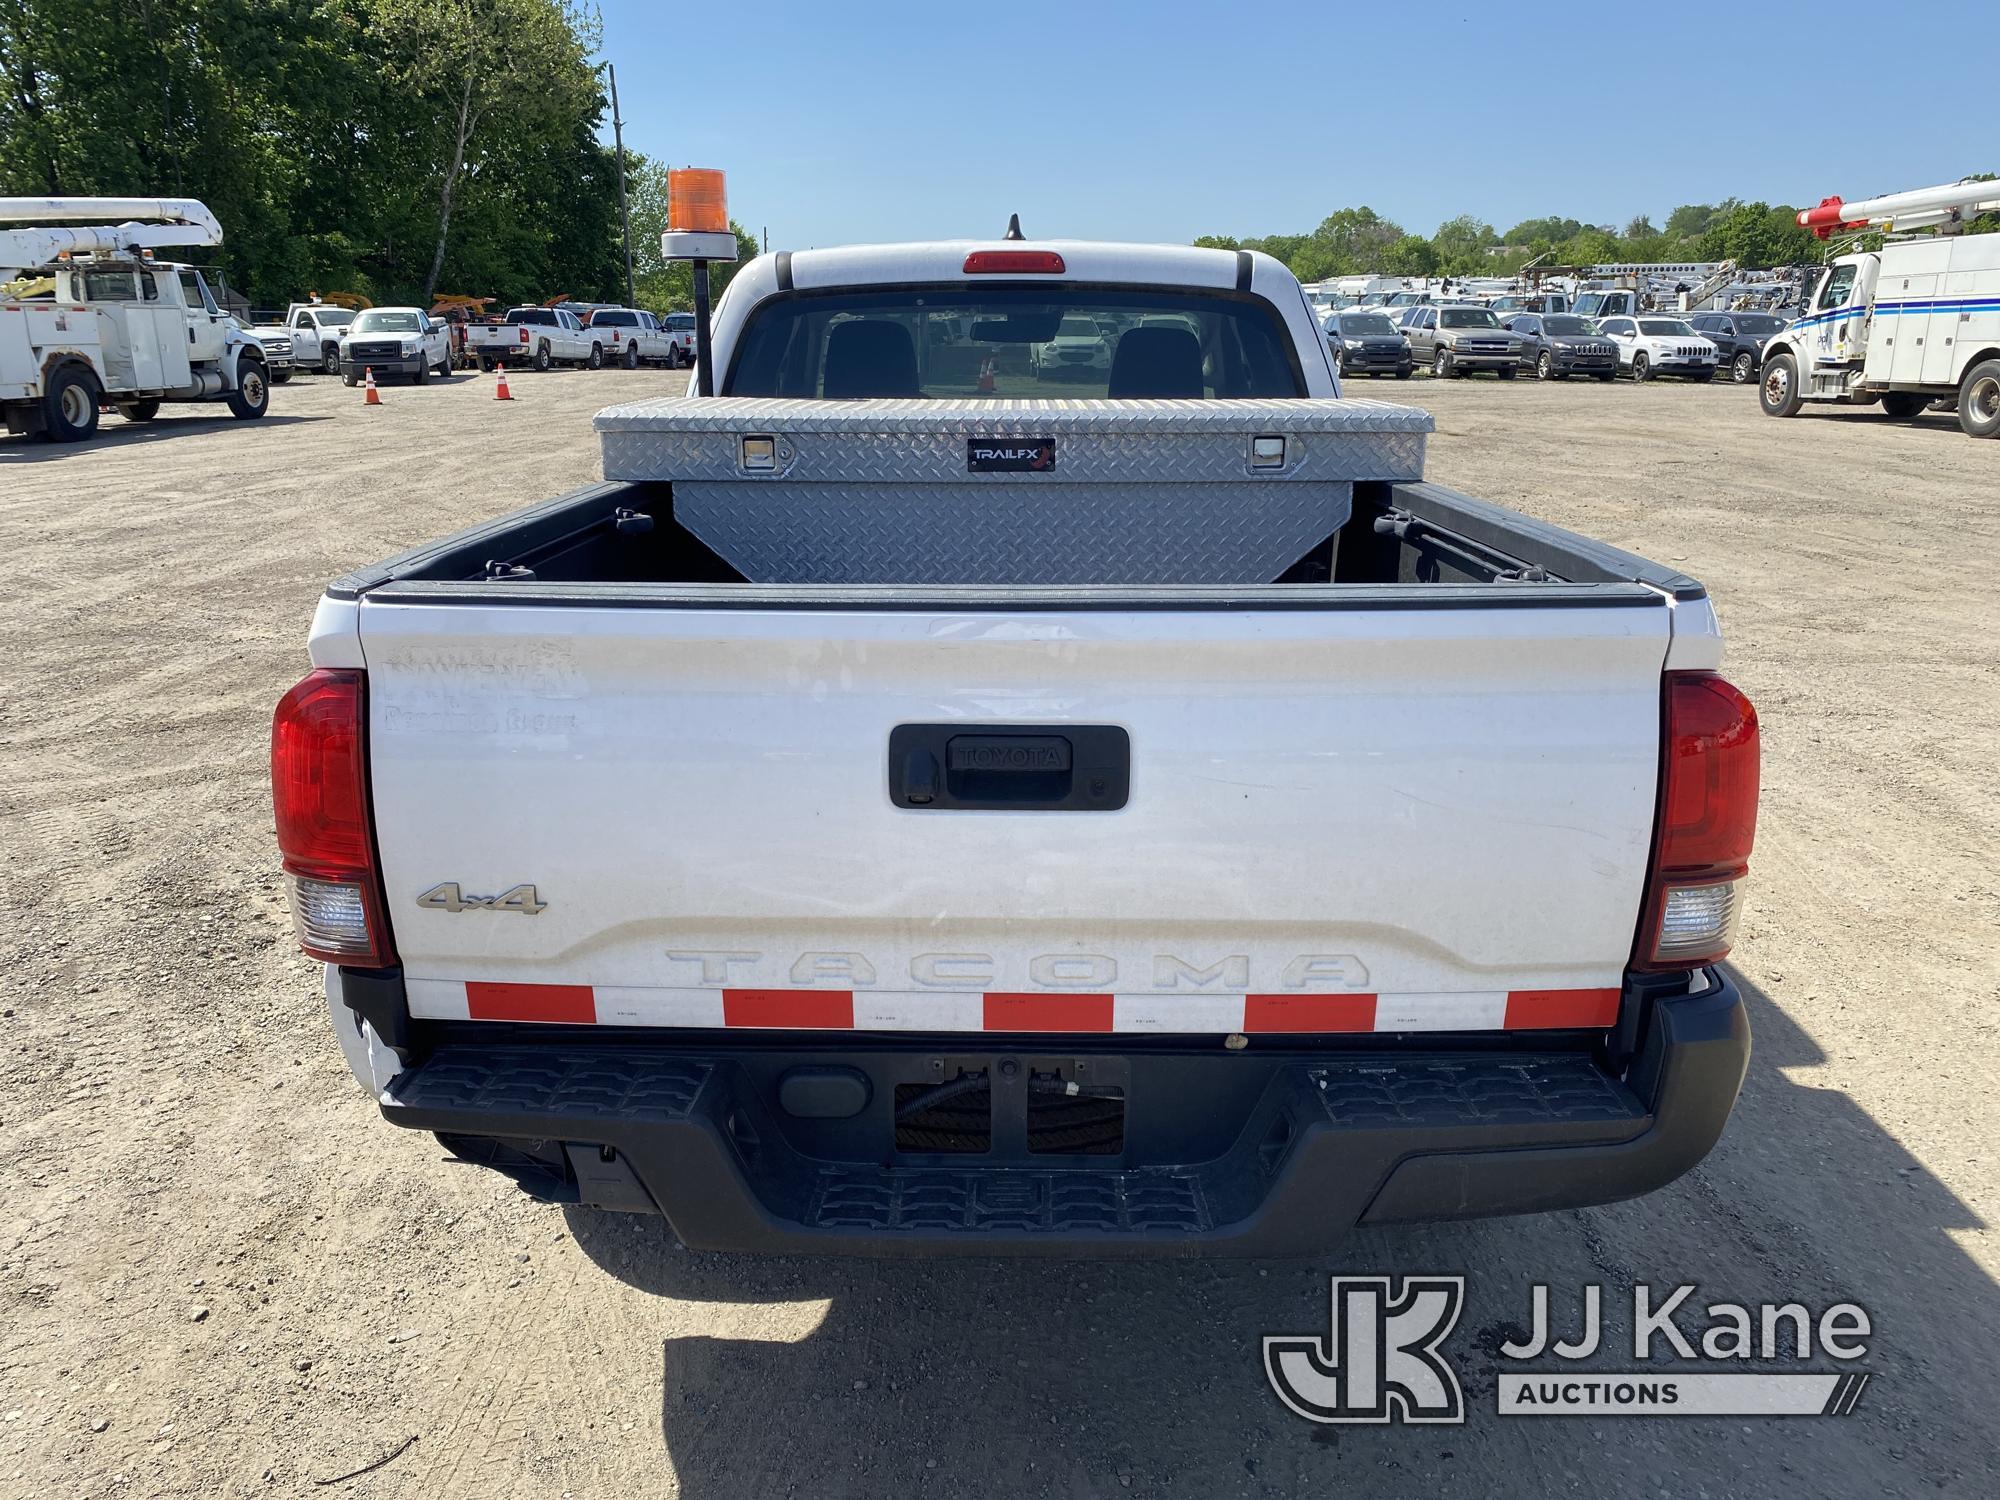 (Plymouth Meeting, PA) 2019 Toyota Tacoma 4x4 Extended-Cab Pickup Truck Runs & Moves, Body & Rust Da